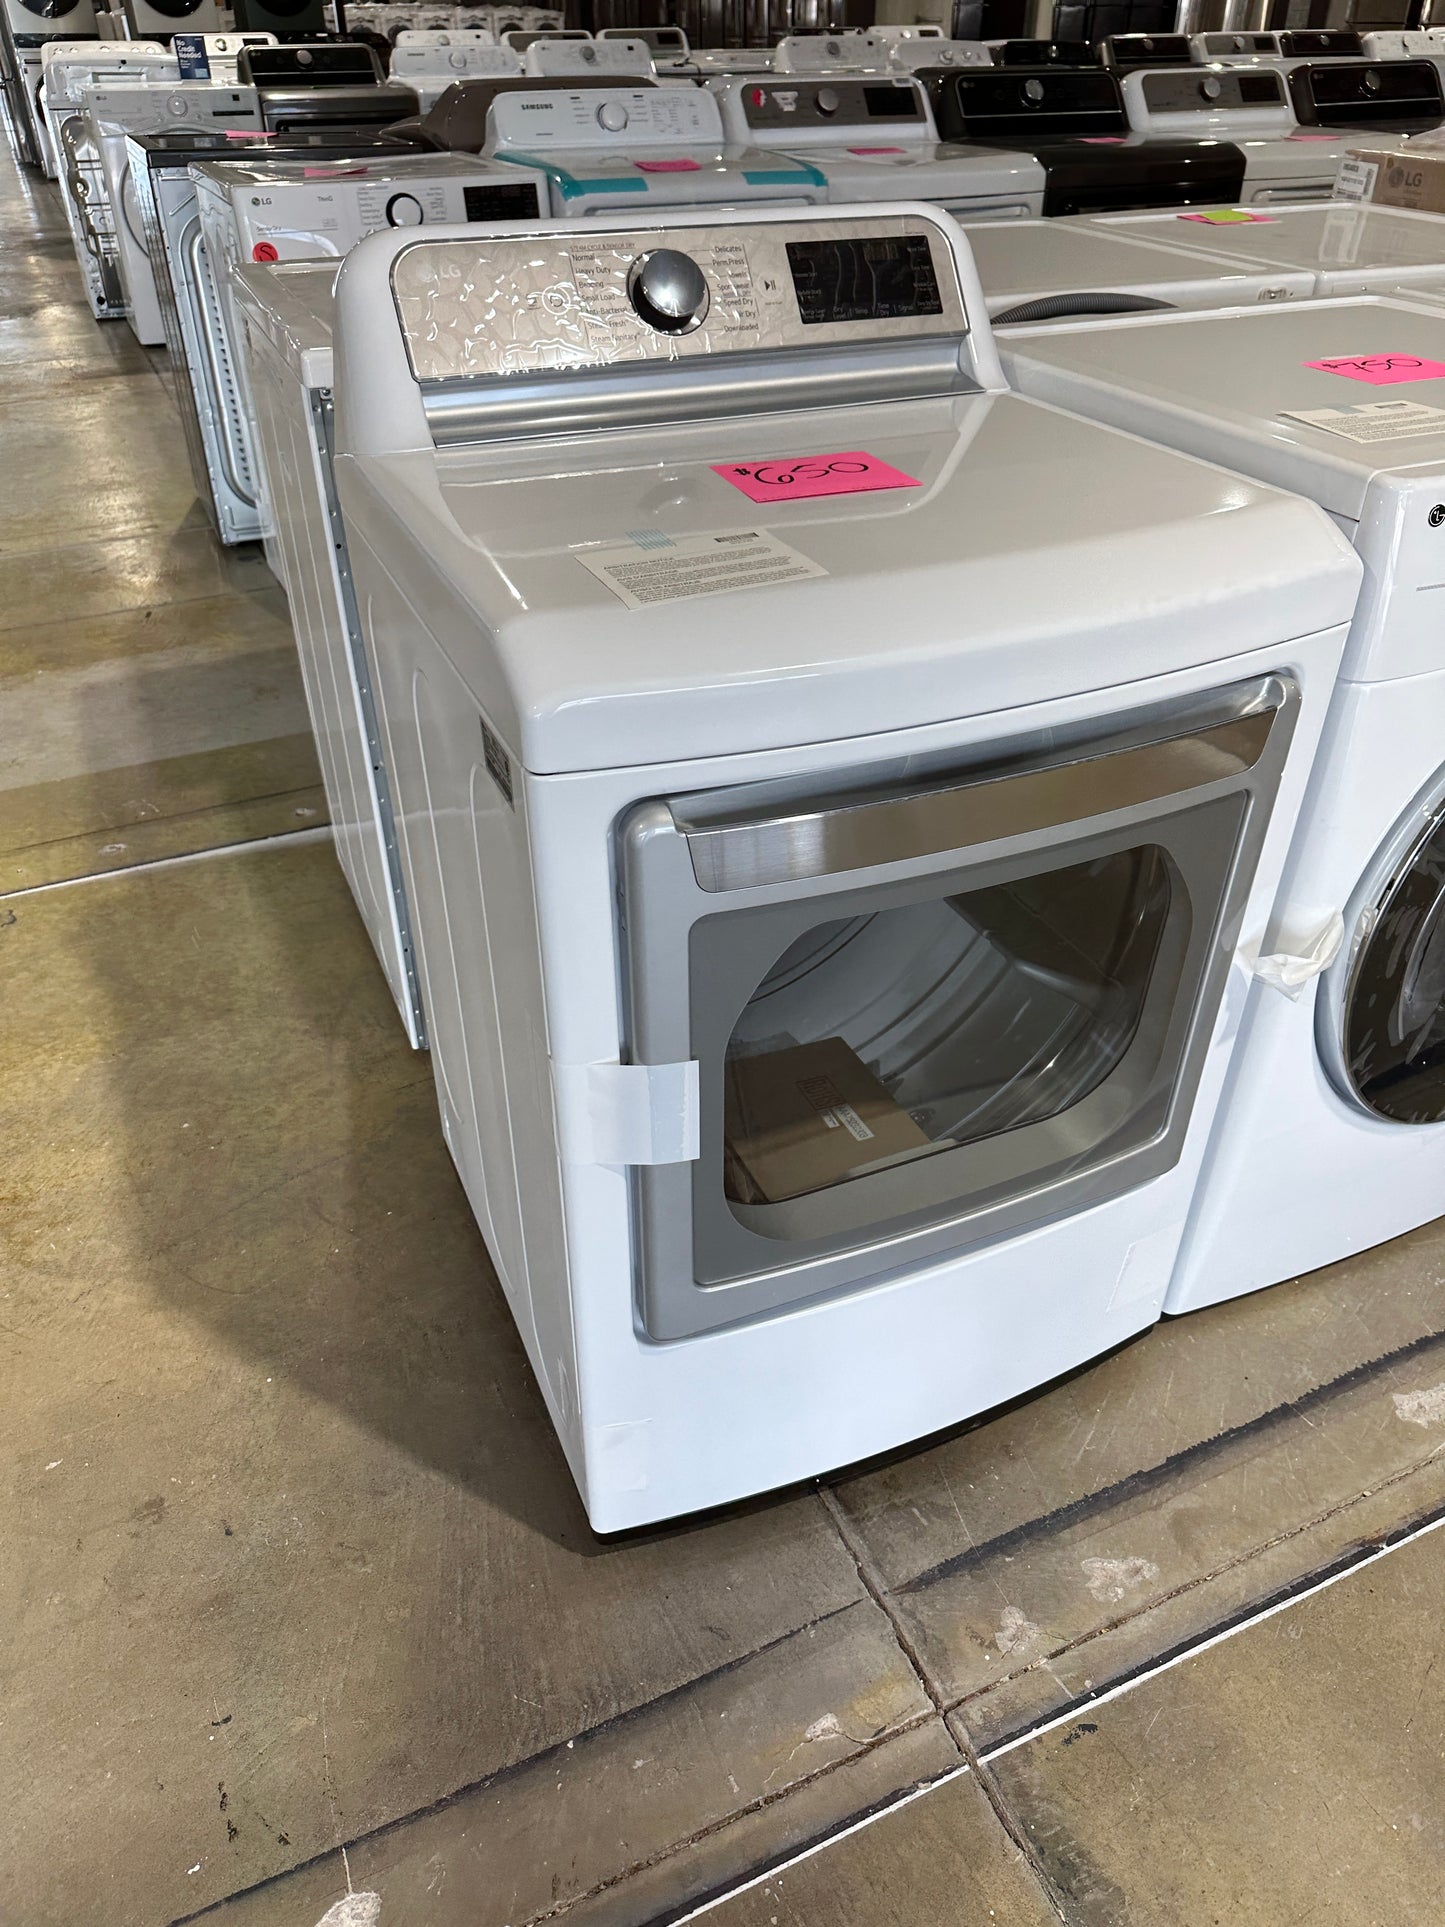 Model: DLEX7800WE NEW LG ELECTRIC DRYER - DRY11653S